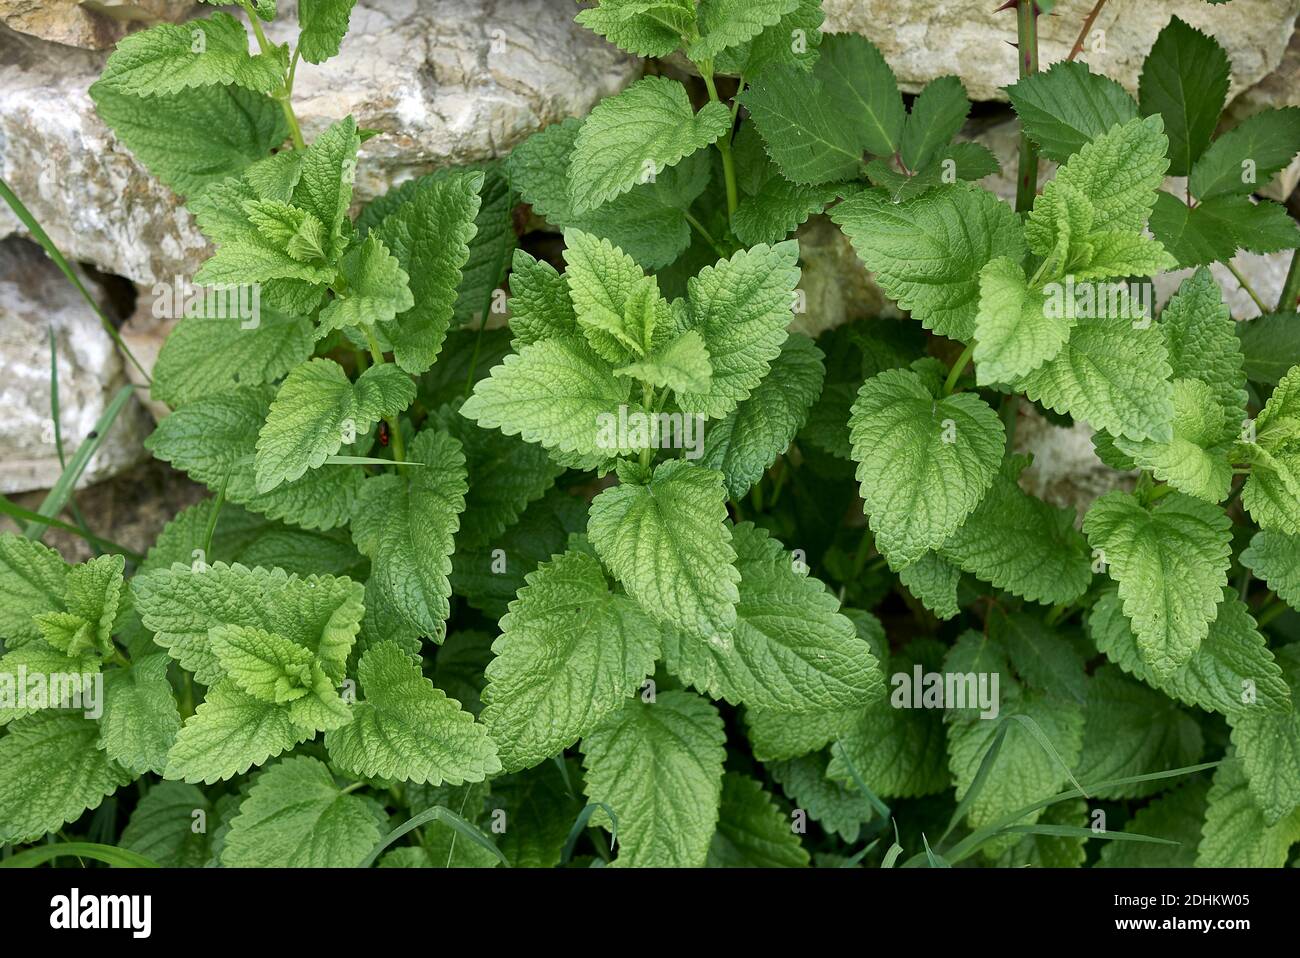 Melissa officinalis plants in an agricultural field Stock Photo